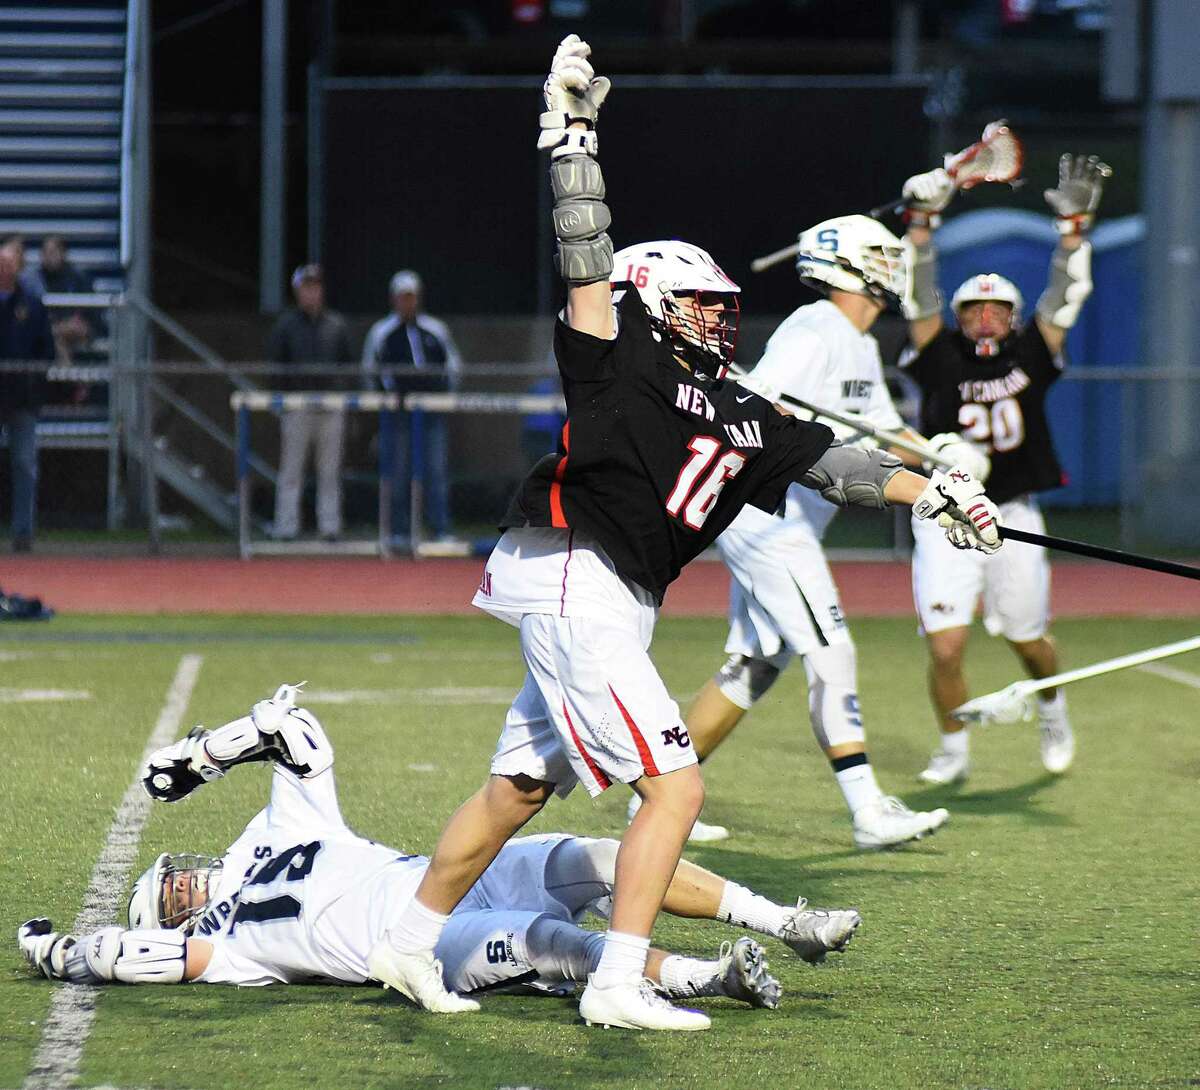 New Canaan's Graham Braden, center, reacts after scoring the game-winning goal with four seconds left in the second overtime during the Rams' 15-14 FCIAC boys lacrosse win over Staples in Westport on Wednesday night.